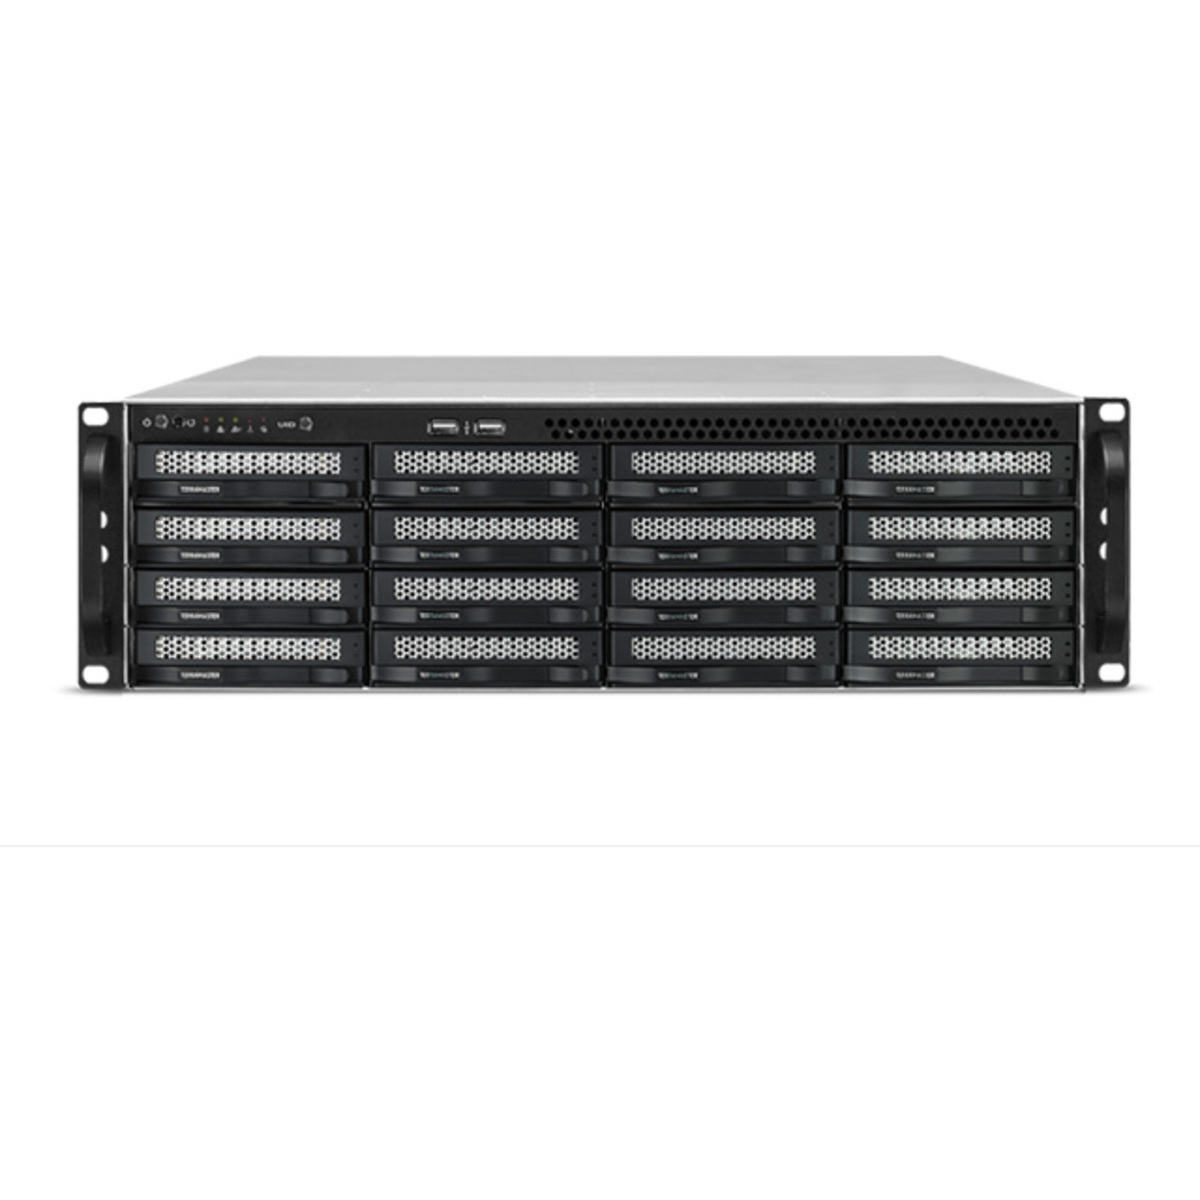 TerraMaster U16-722-2224 RackMount 16-Bay Large Business / Enterprise NAS - Network Attached Storage Device Burn-In Tested Configurations U16-722-2224